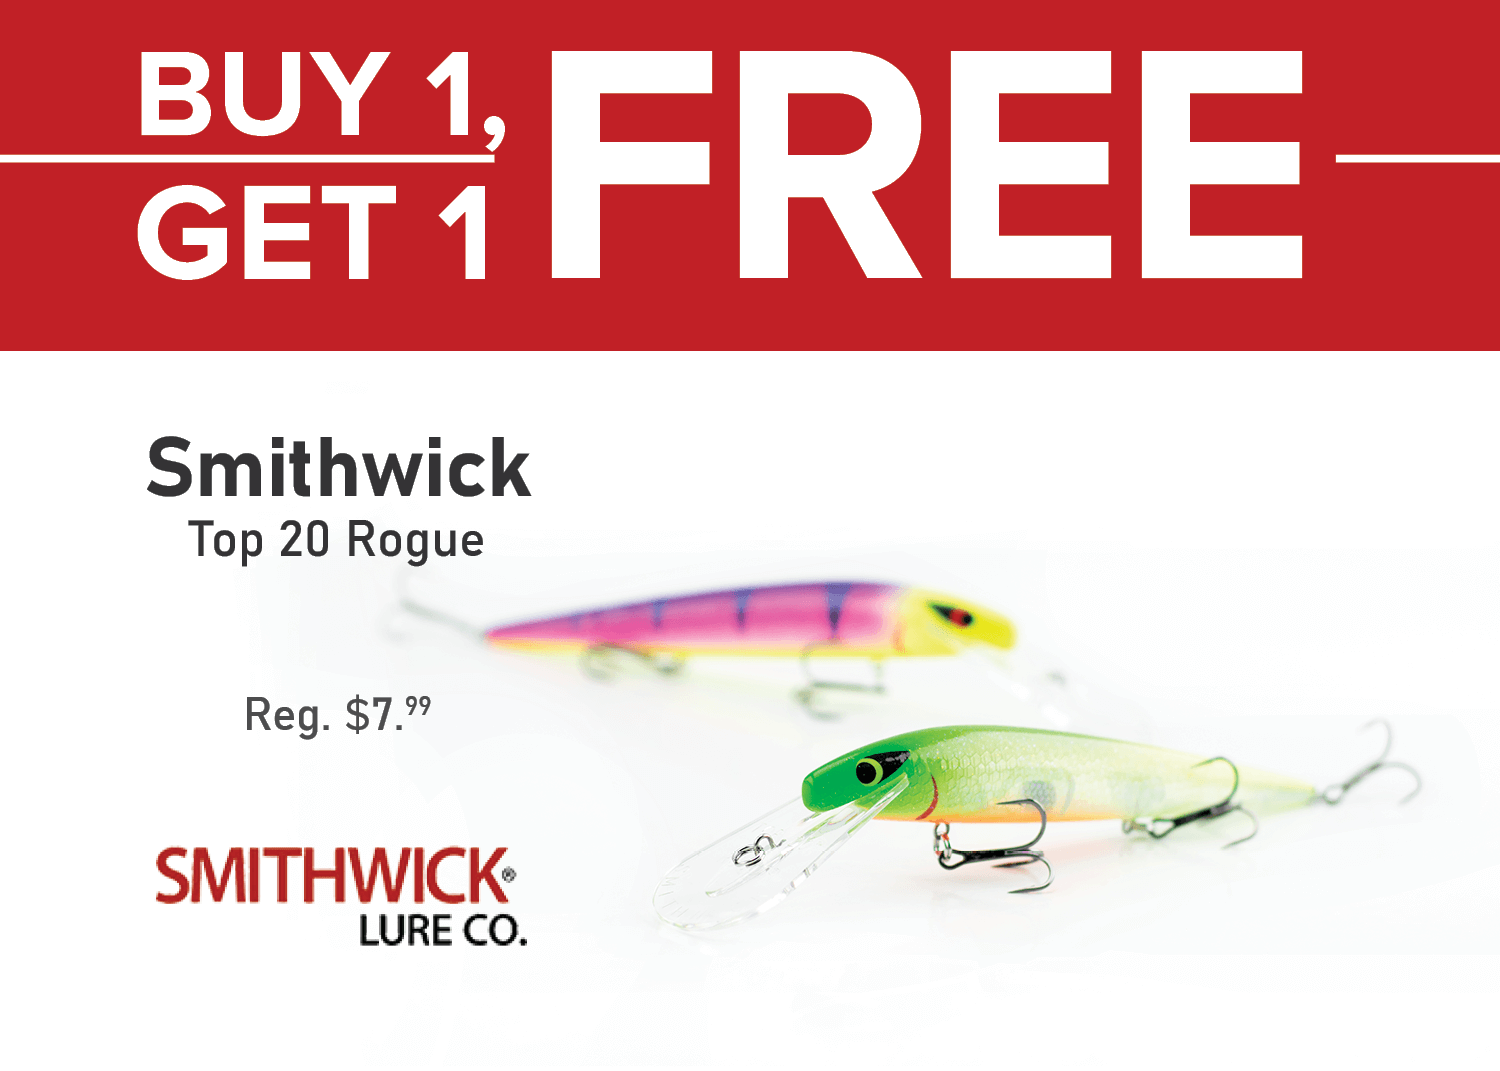 Buy 1, Get 1 FREE on Smithwick Top 20 Rogue